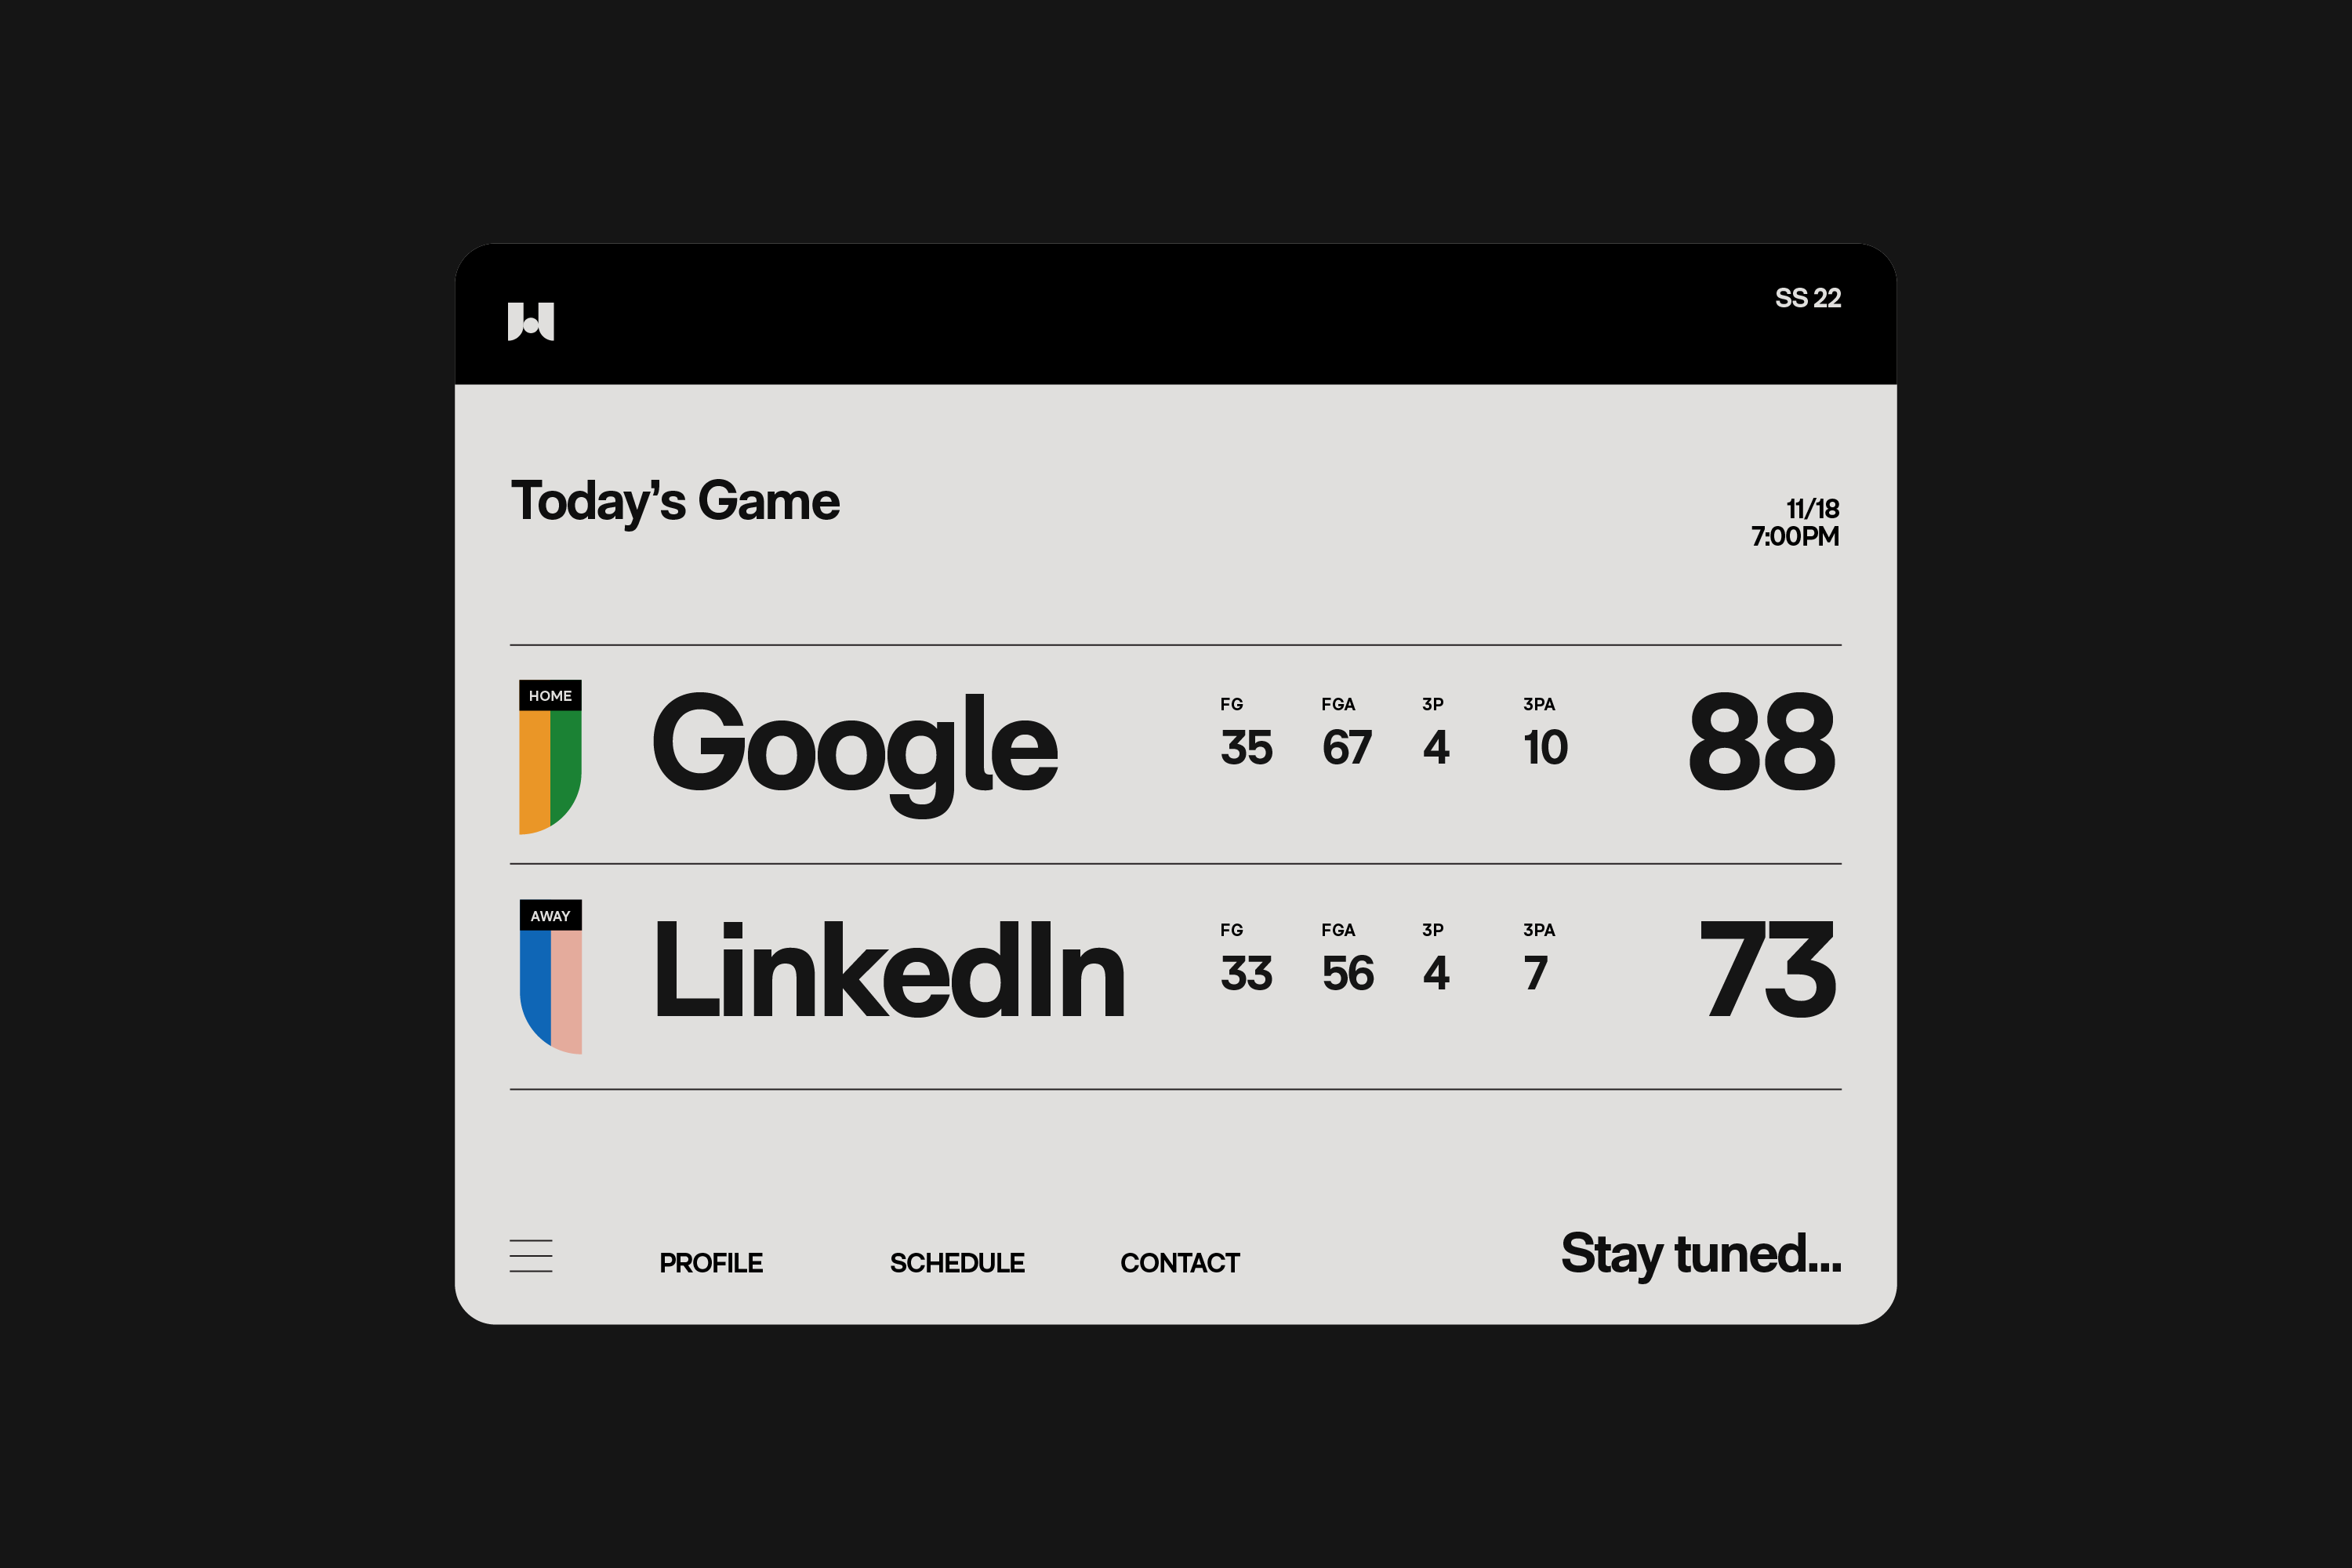 A screenshot of the results of the Google versus LinkedIn basketball game